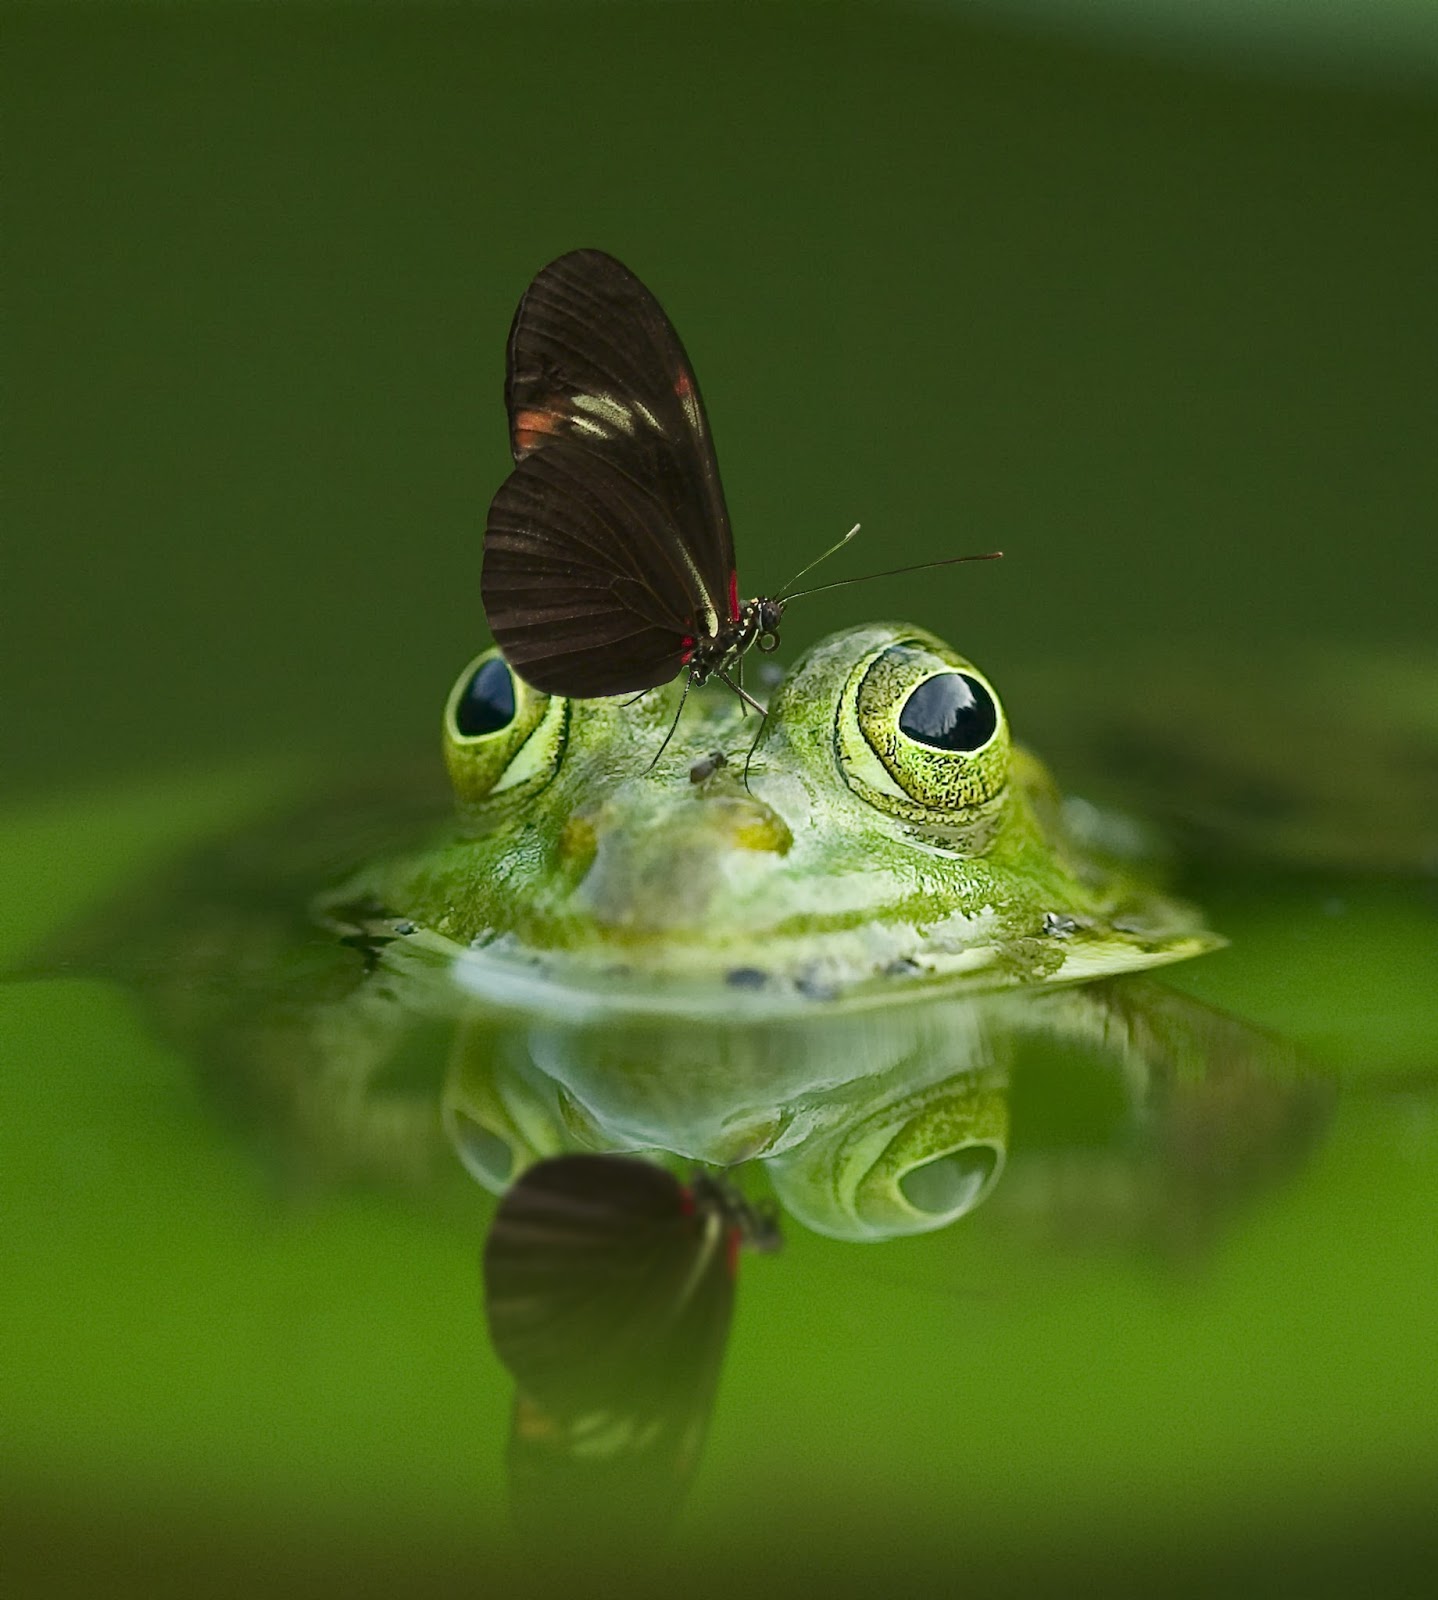 A picture of a butterfly on a frog.